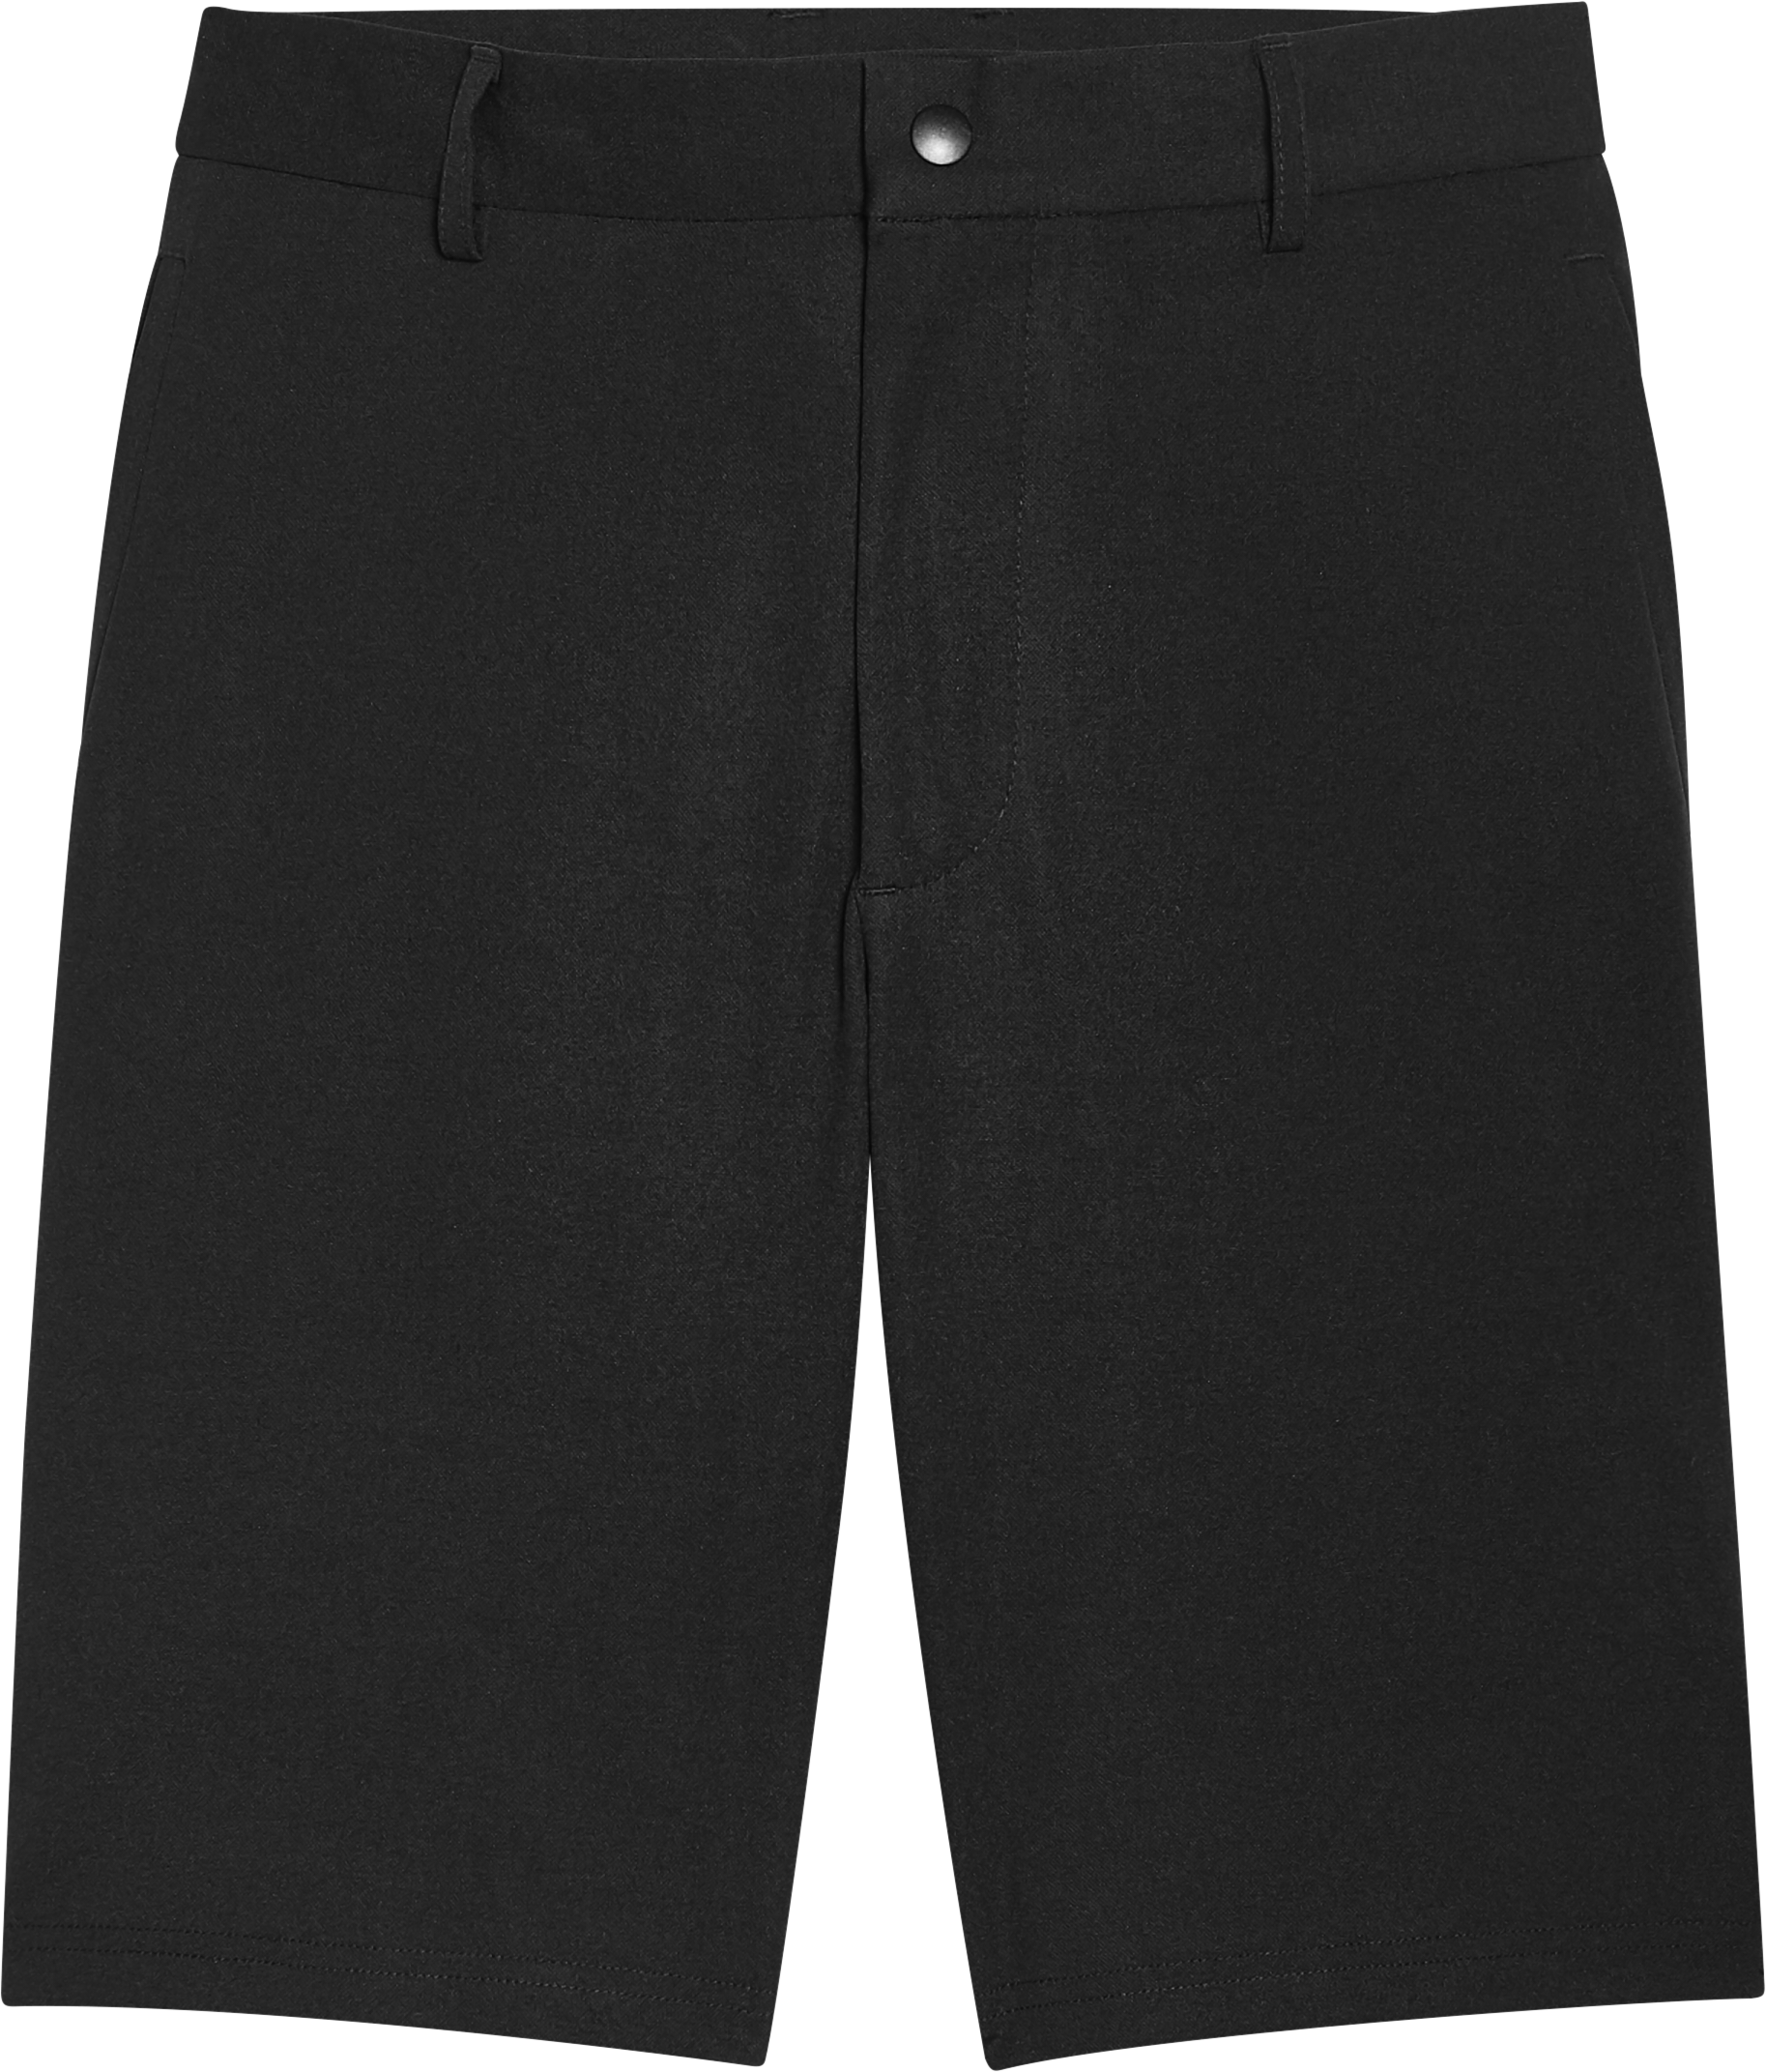 Msx By Michael Strahan Modern Fit Activewear Shorts Black Mens Sale Mens Wearhouse 